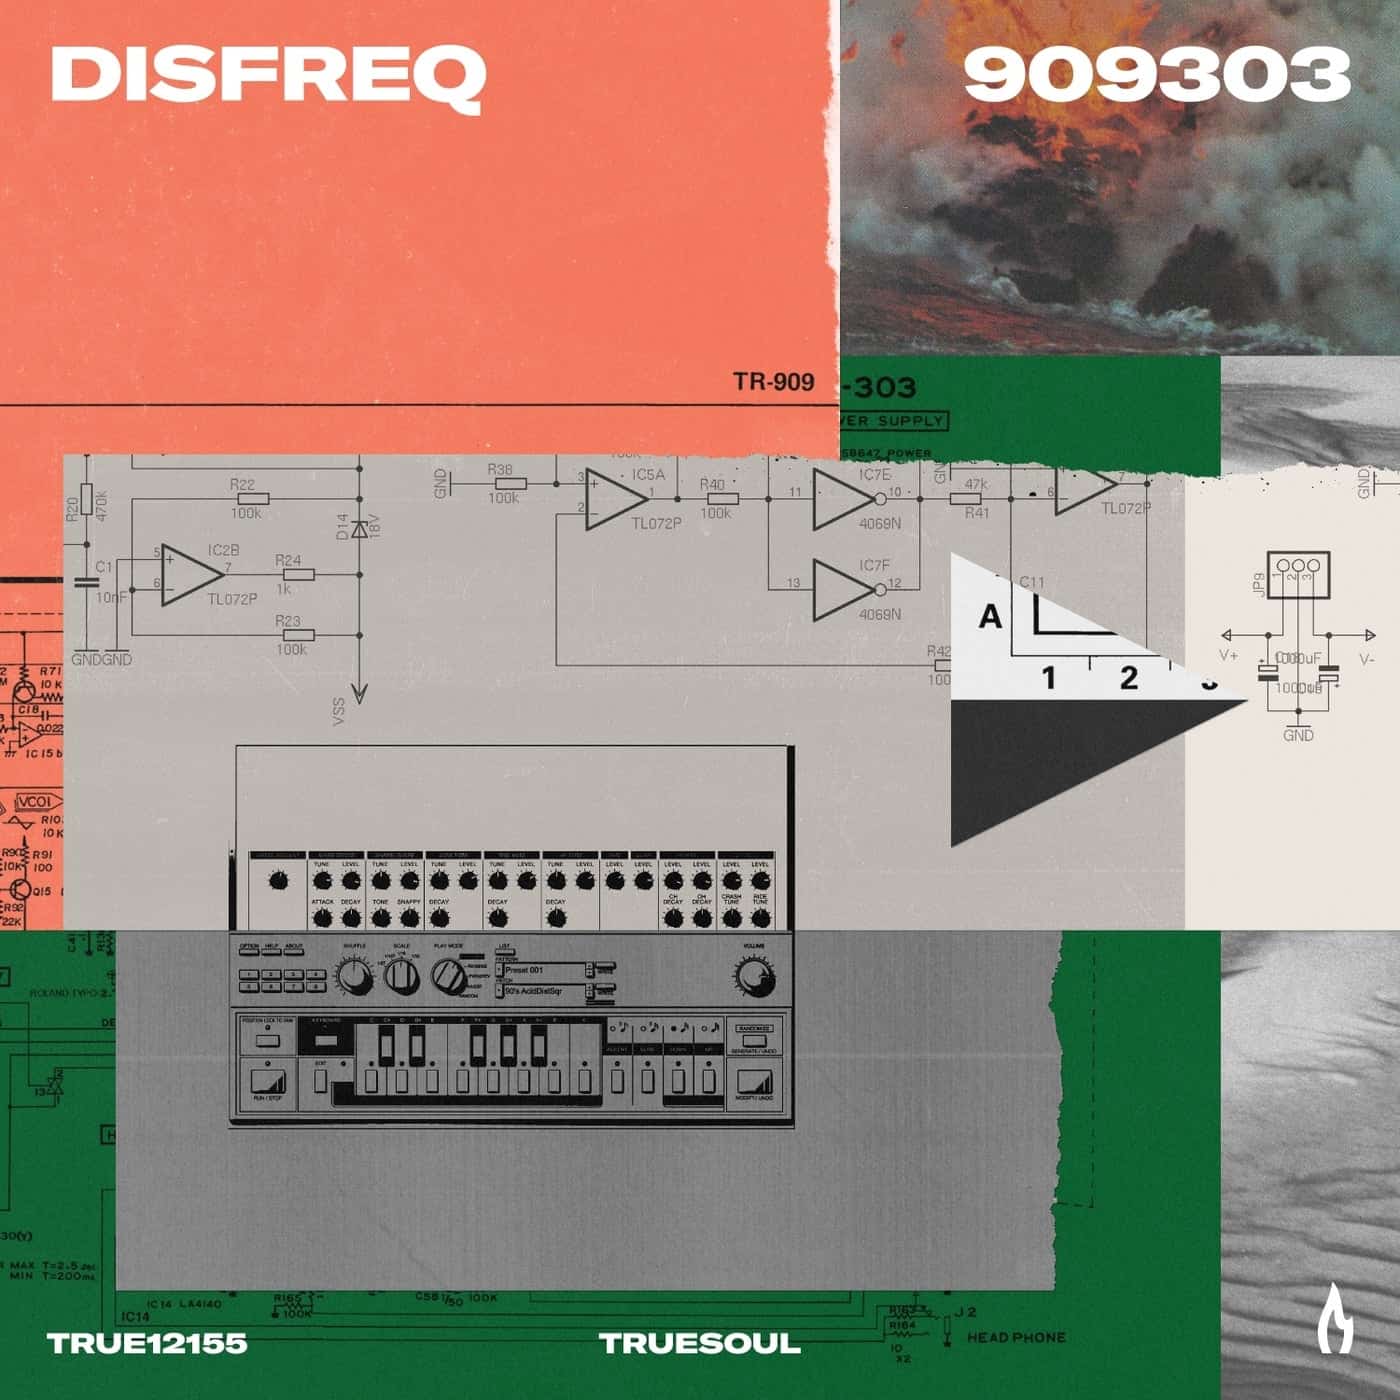 Download Disfreq - 909303 on Electrobuzz